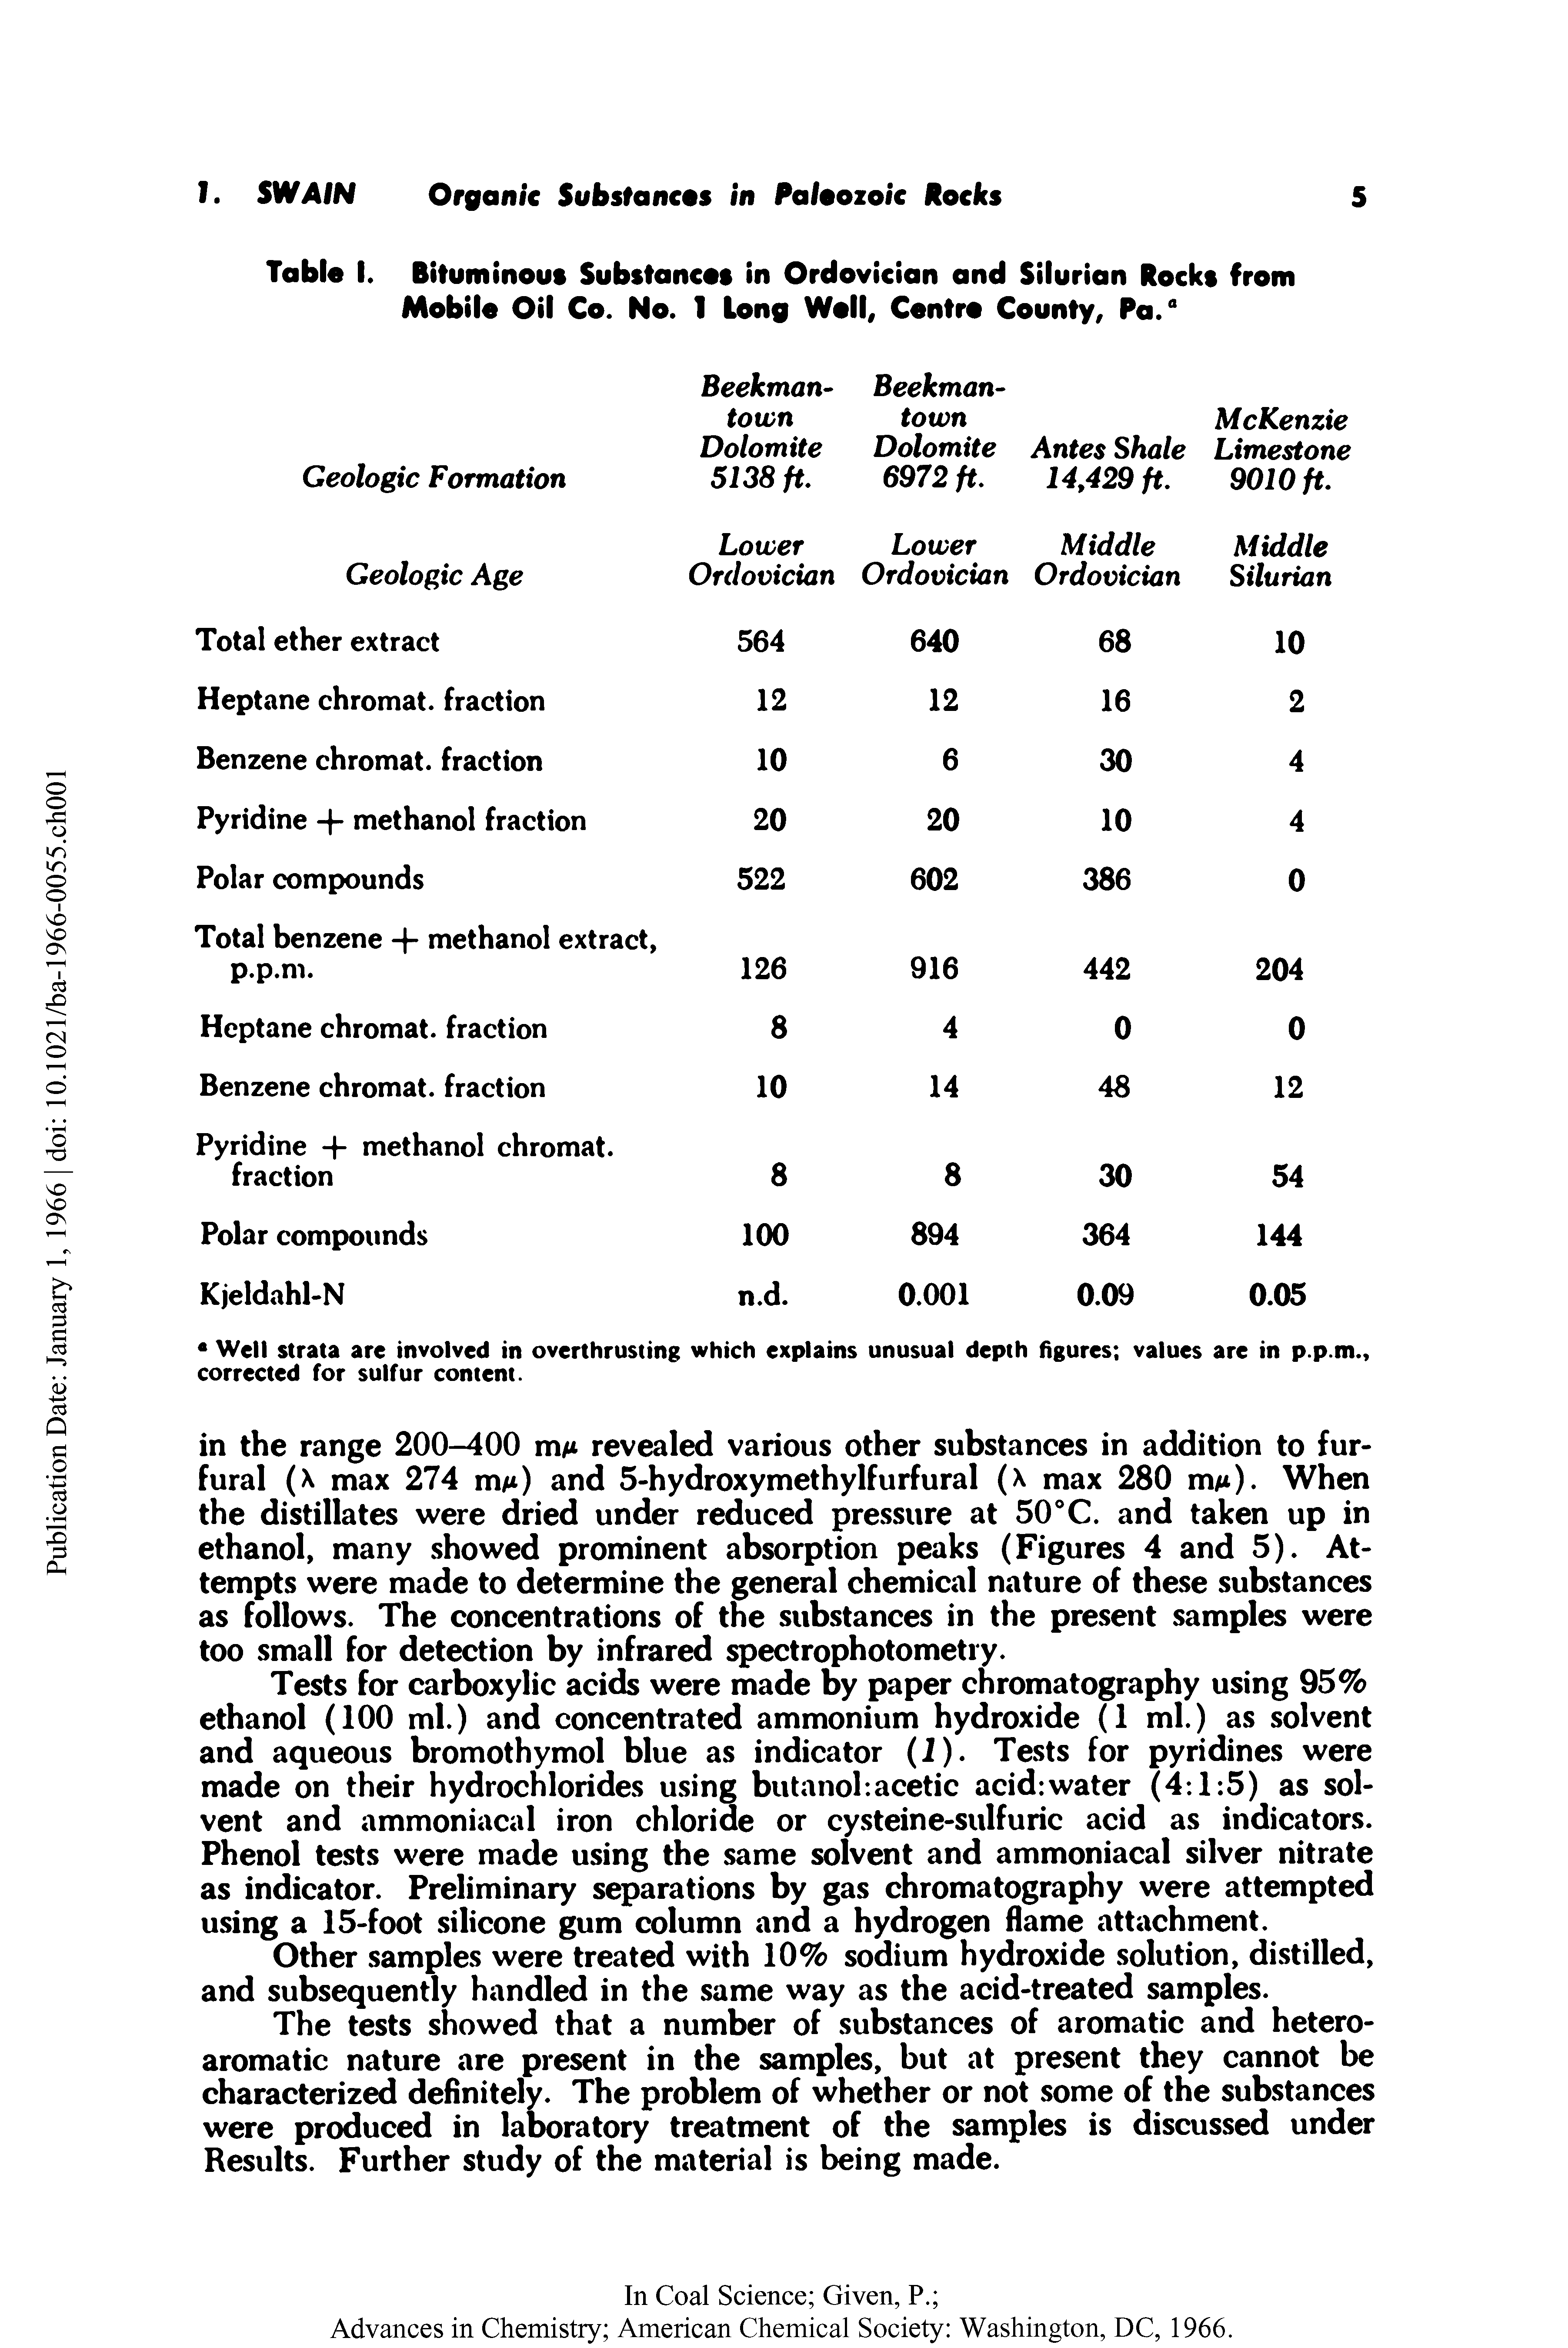 Table I. Bituminous Substances in Ordovician and Silurian Rocks from Mobile Oil Co. No. 1 long Well, Centre County, Pa.a...